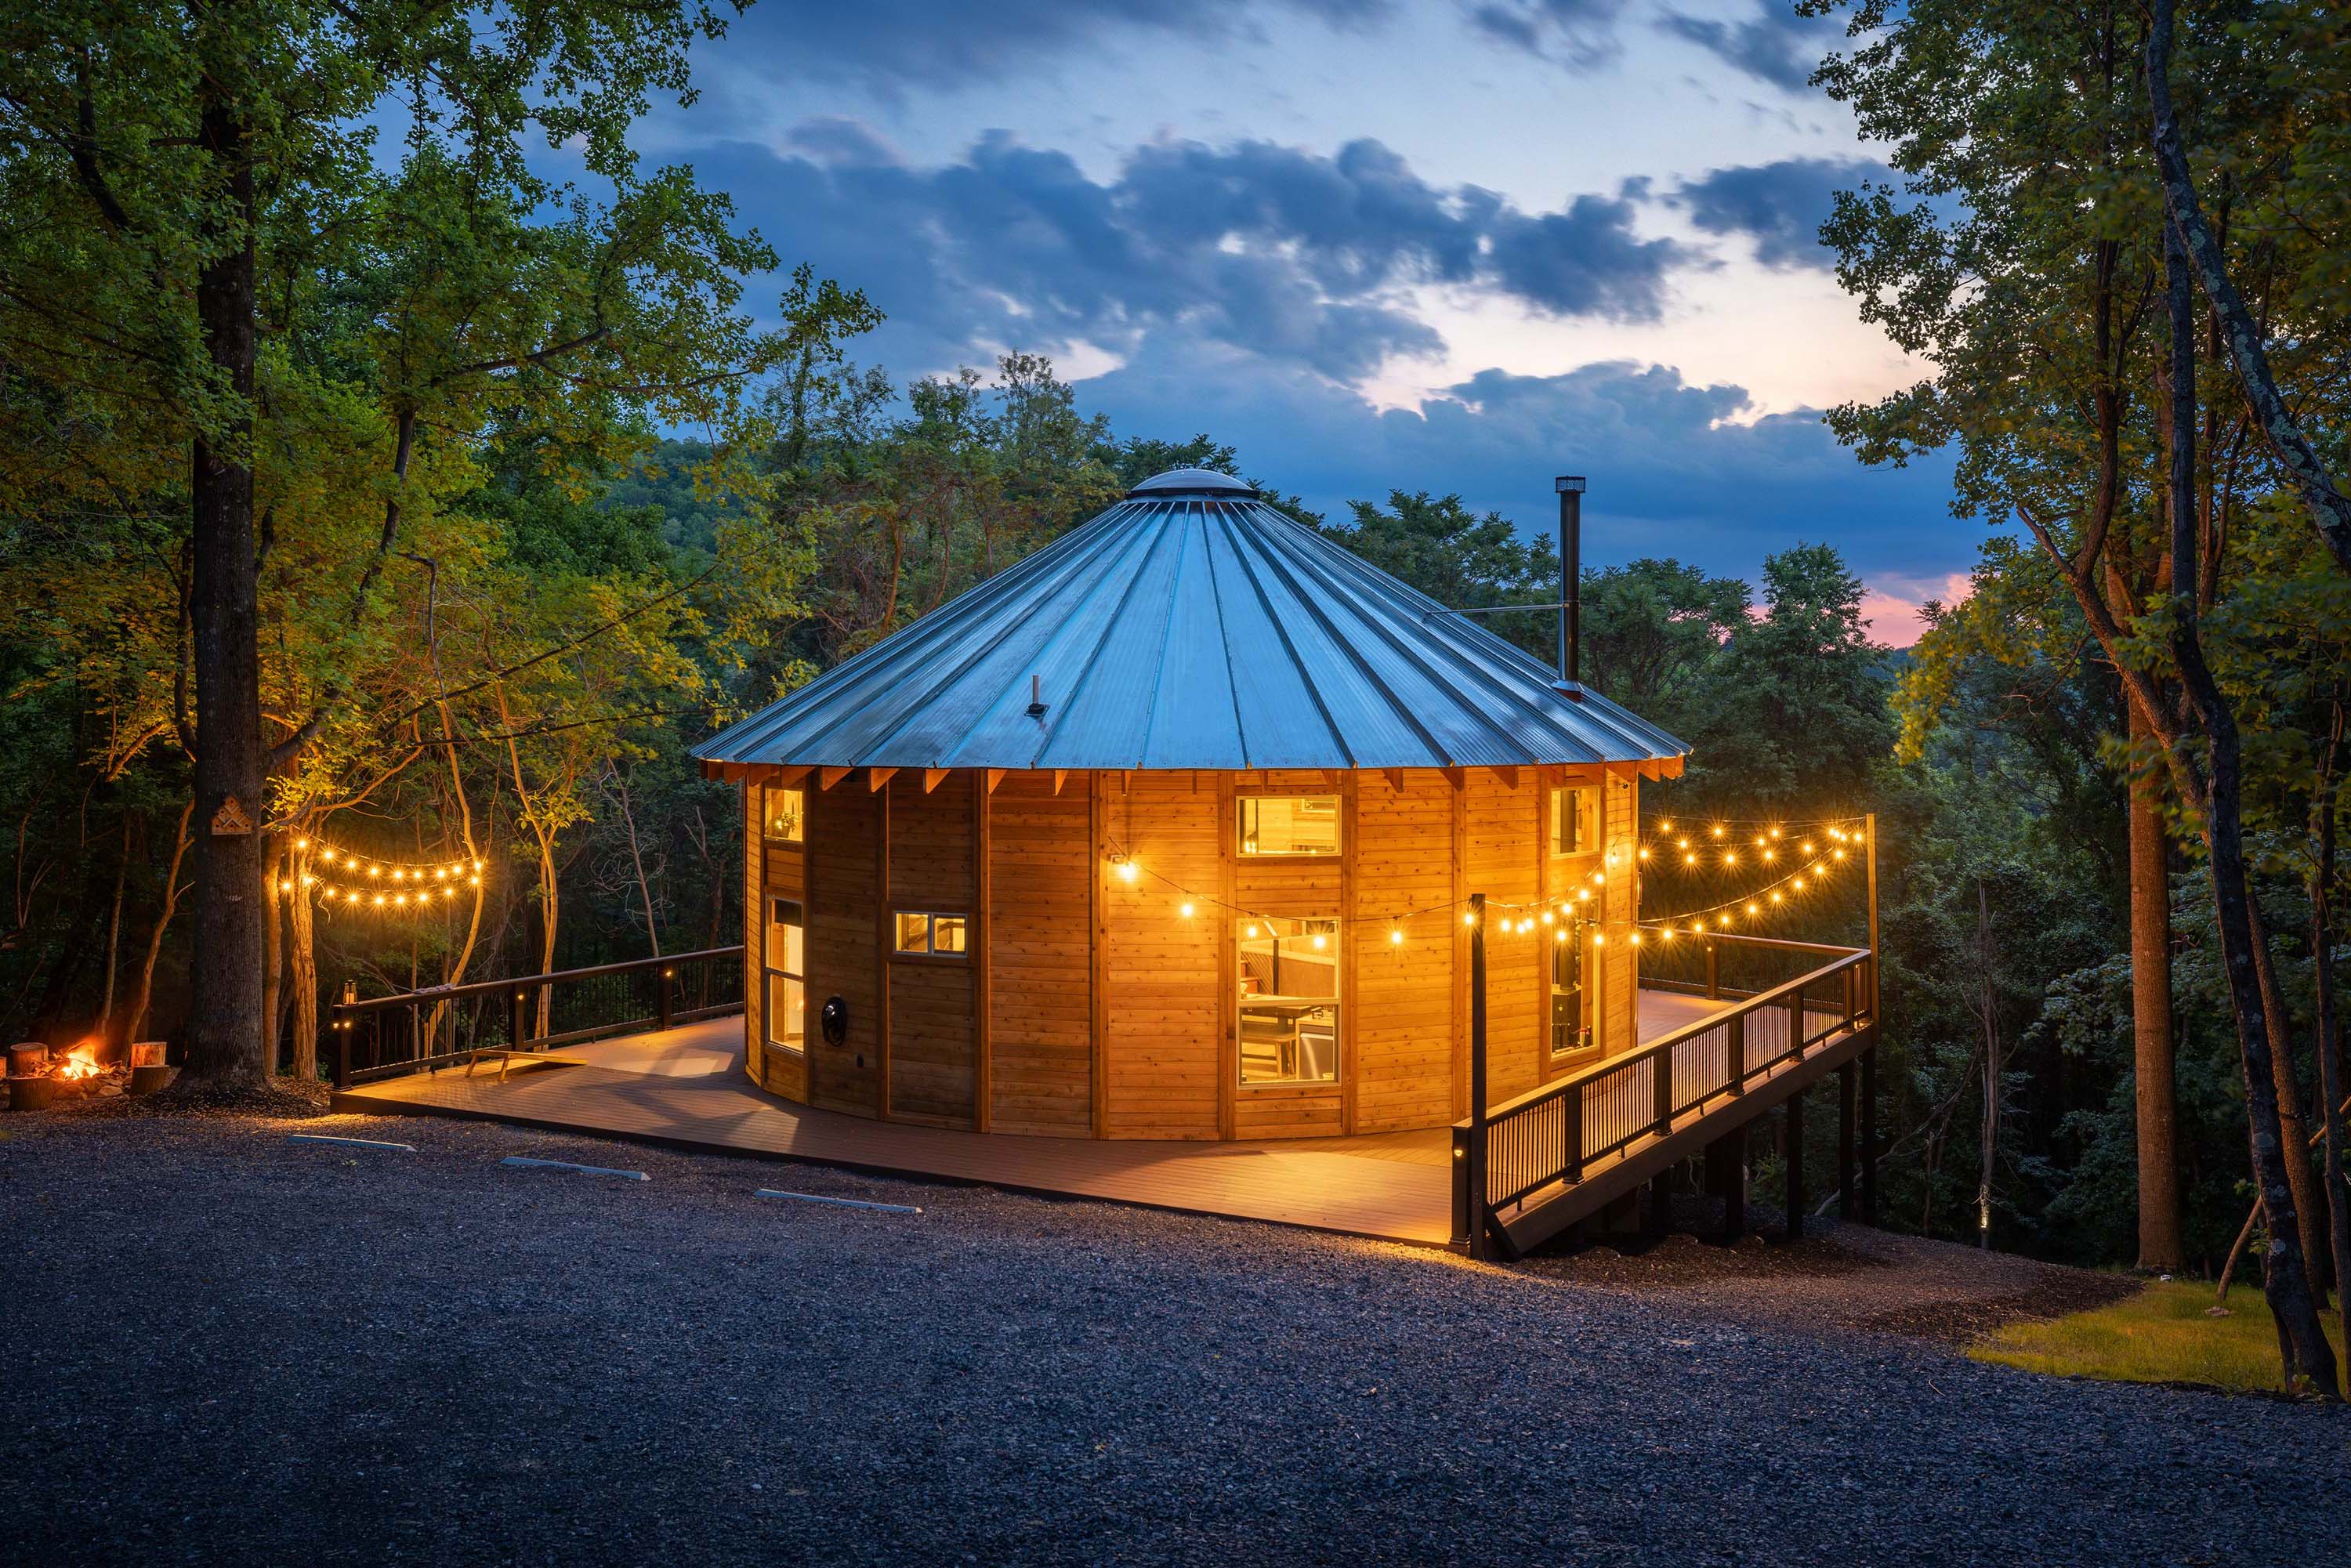 <span  class="uc_style_uc_tiles_grid_image_elementor_uc_items_attribute_title" style="color:#ffffff;">Plenty of parking at the Shenandoah Yurt</span>